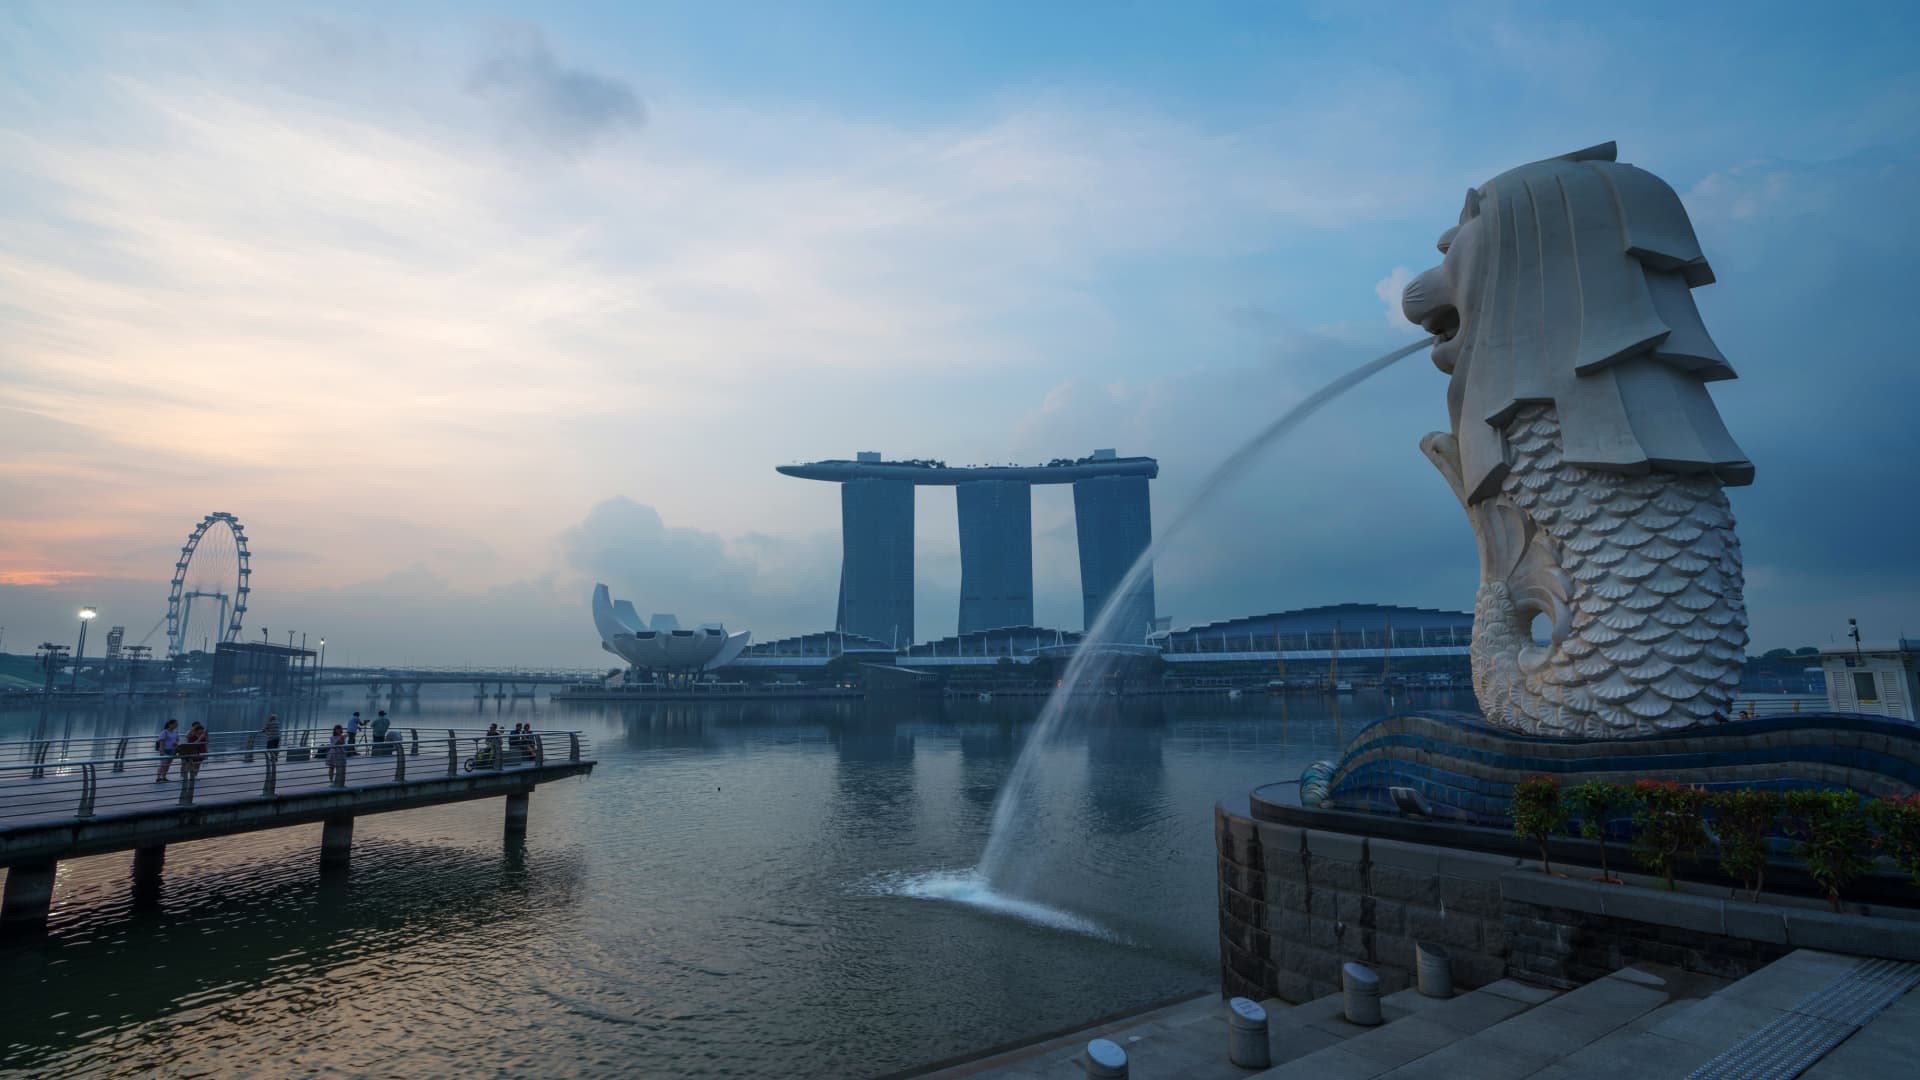 Singapore is not looking to regulate A.I. just yet, says the city-state’s authority